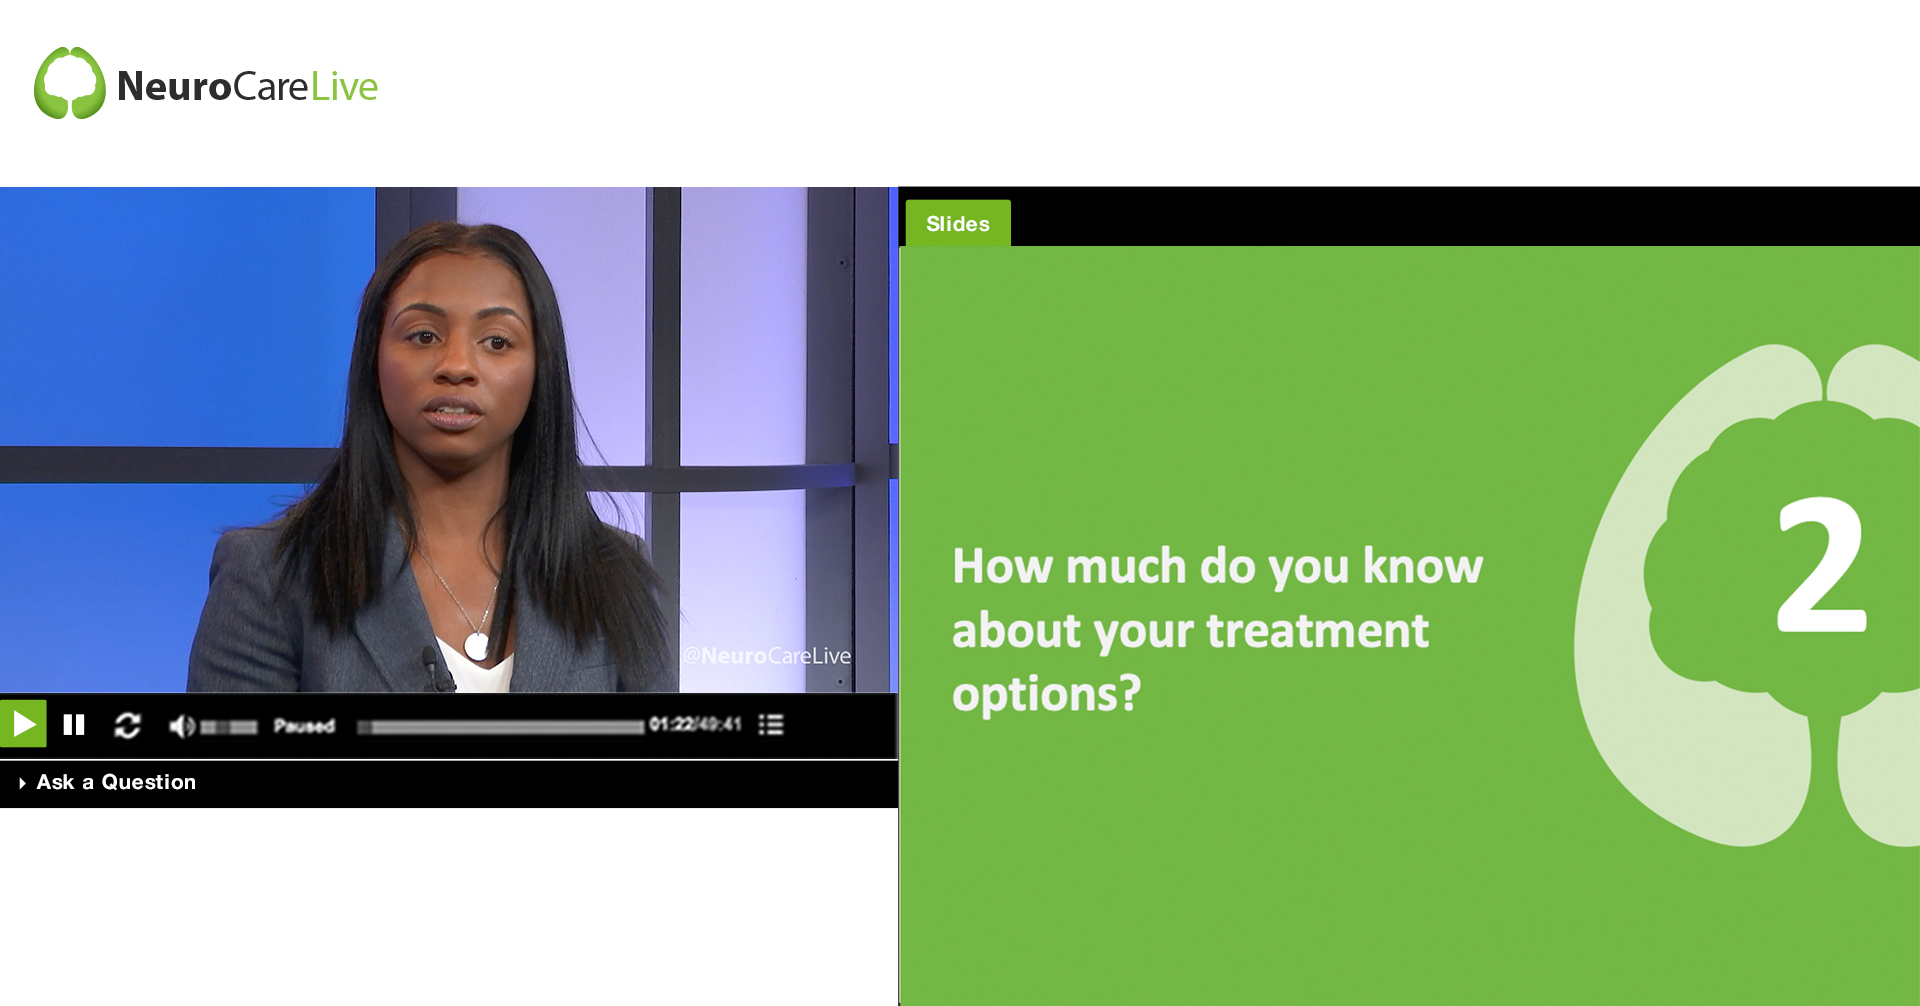 Chapter 2: How much do you know about your treatment options?